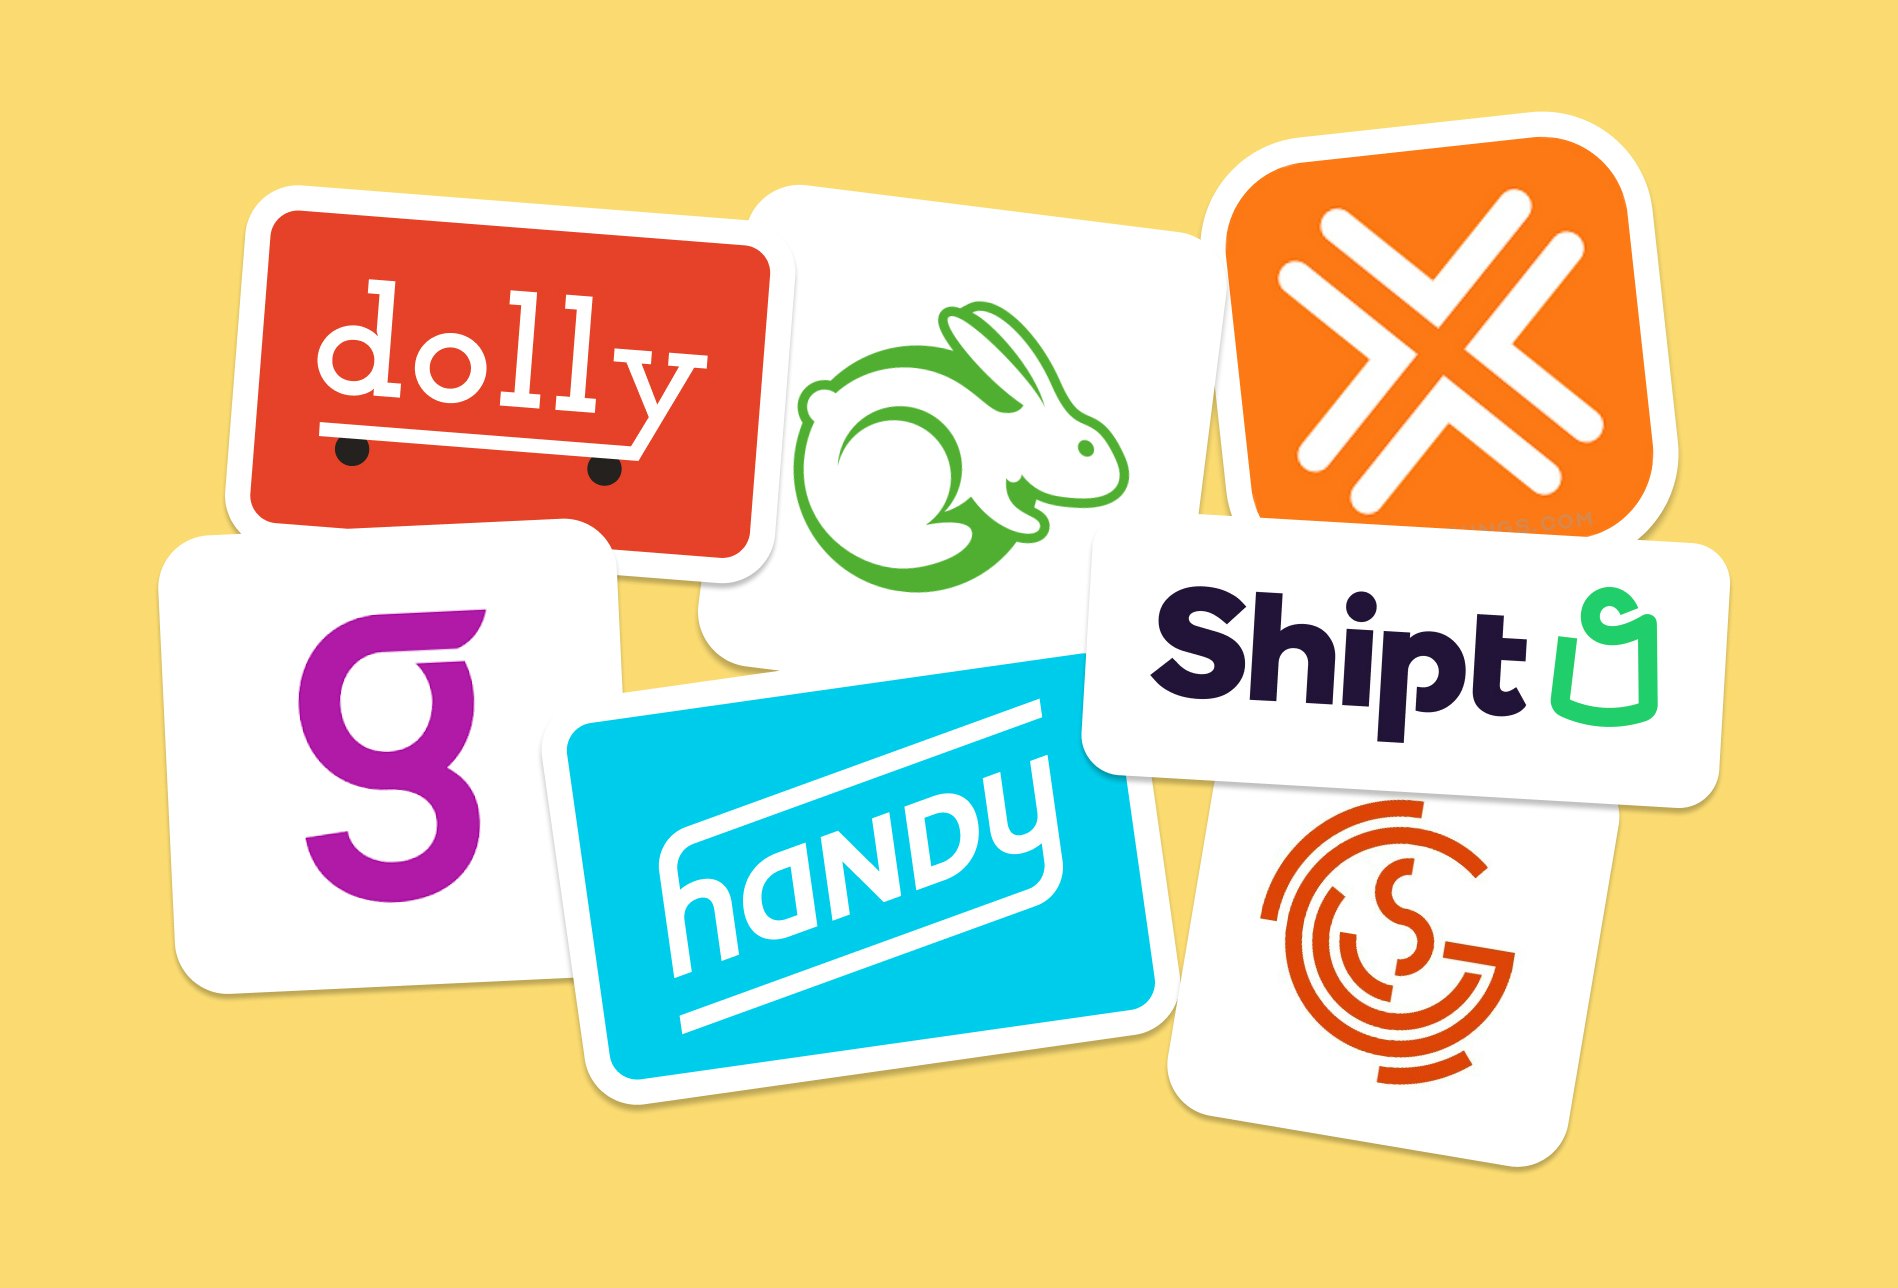 Logos for Dolly, Task Rabbit, Shipt, Handy, GigSmart, and Get Around